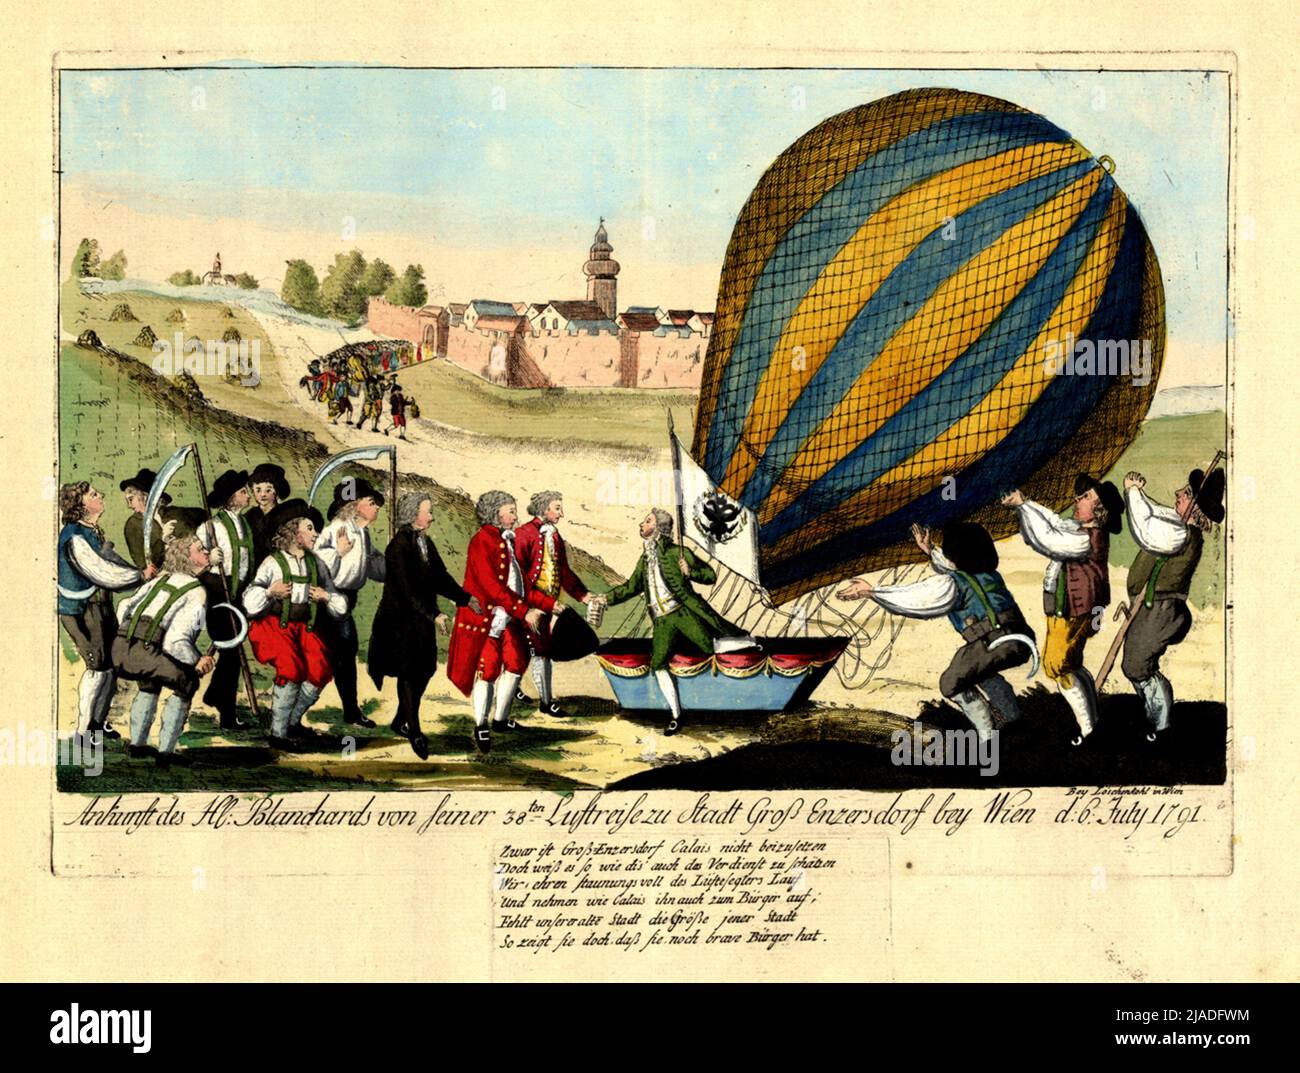 Arrival of the Holy Blanchard from his 38th air trip to the city of Groß Enzersdorf Bey Vienna D. July 1791 '. Jean-Pierre Blanchards Arrival of his 38th air travel in Großenzersdorf near Vienna. Johann Hieronymus Rohenkohl (1753-1807), publishing house Stock Photo